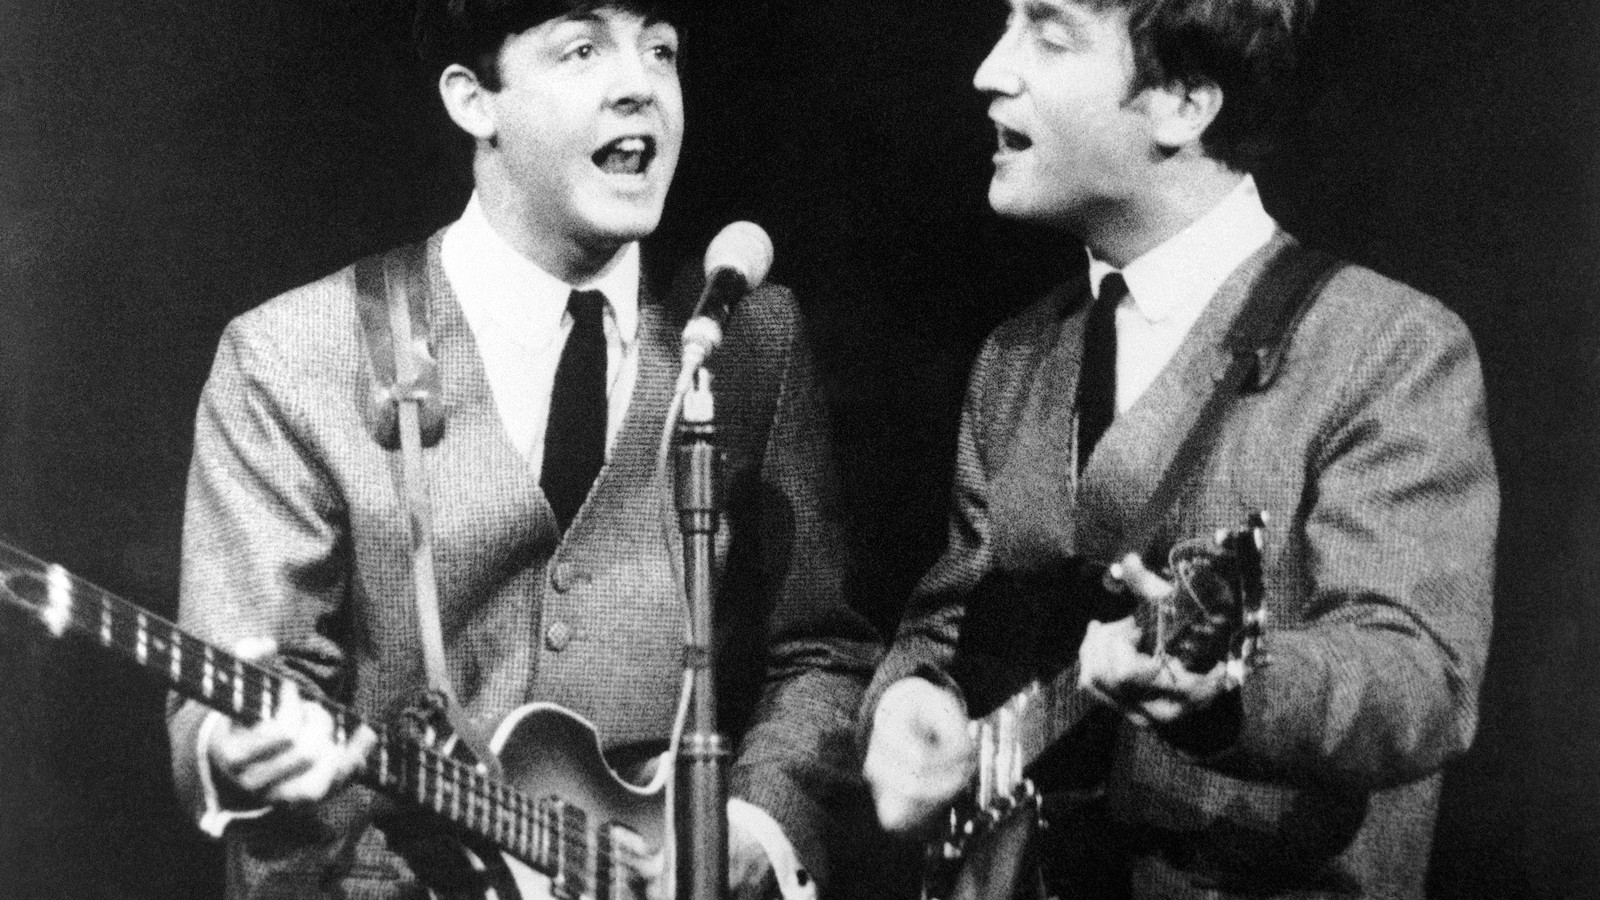 Two of Us stars on returning to Lennon and McCartney roles